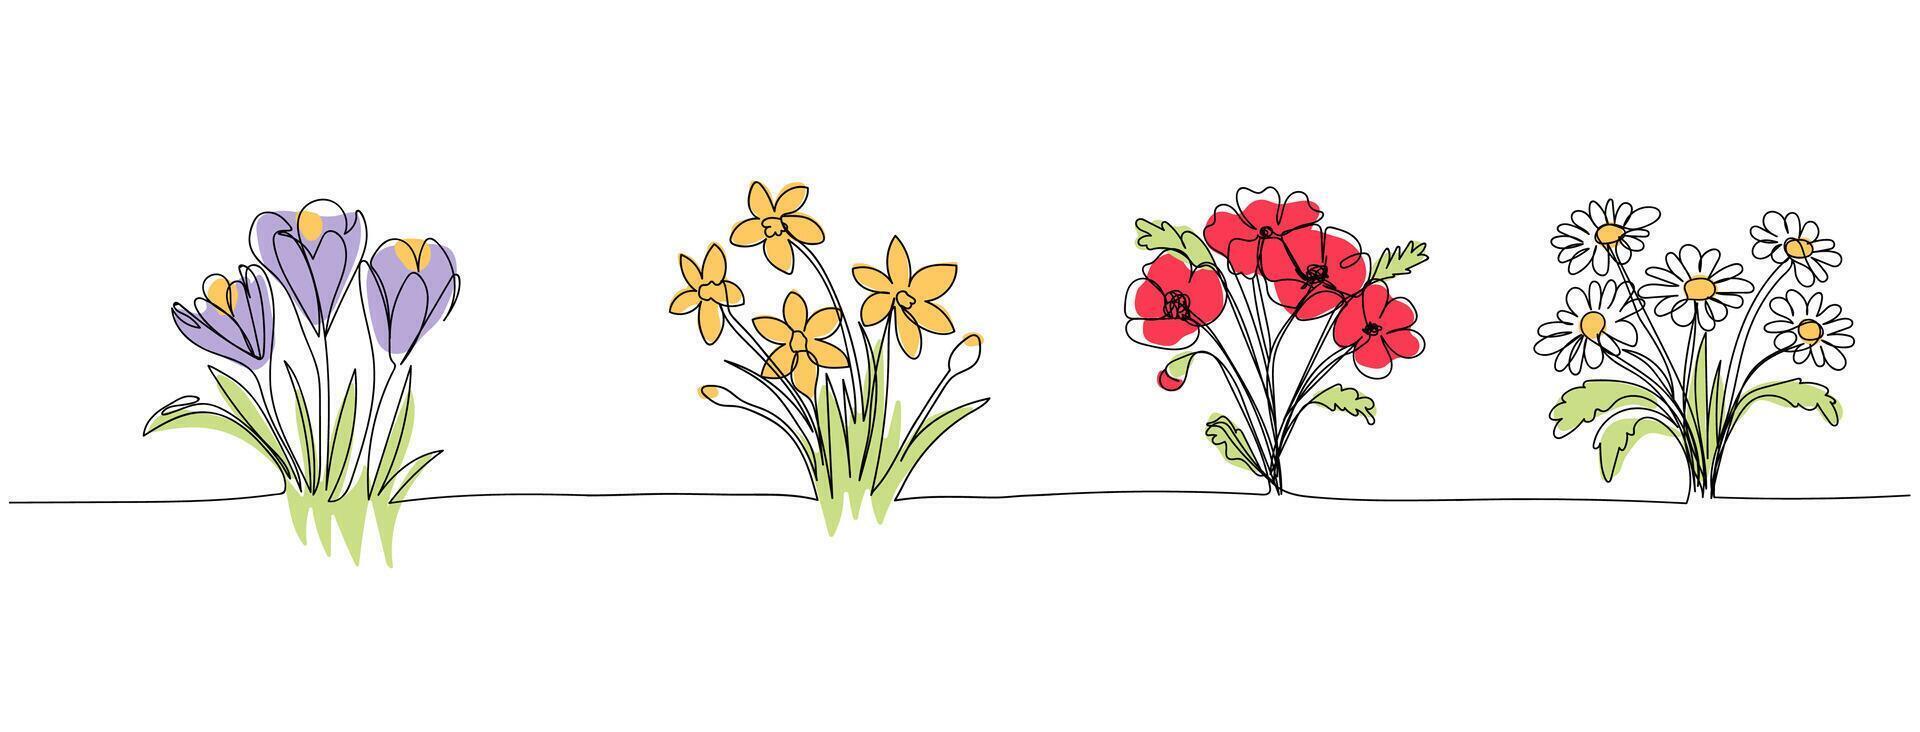 line art, bouquet of flowers crocus, poppies, daisy, poppy, single line drawing. vector illustration white background